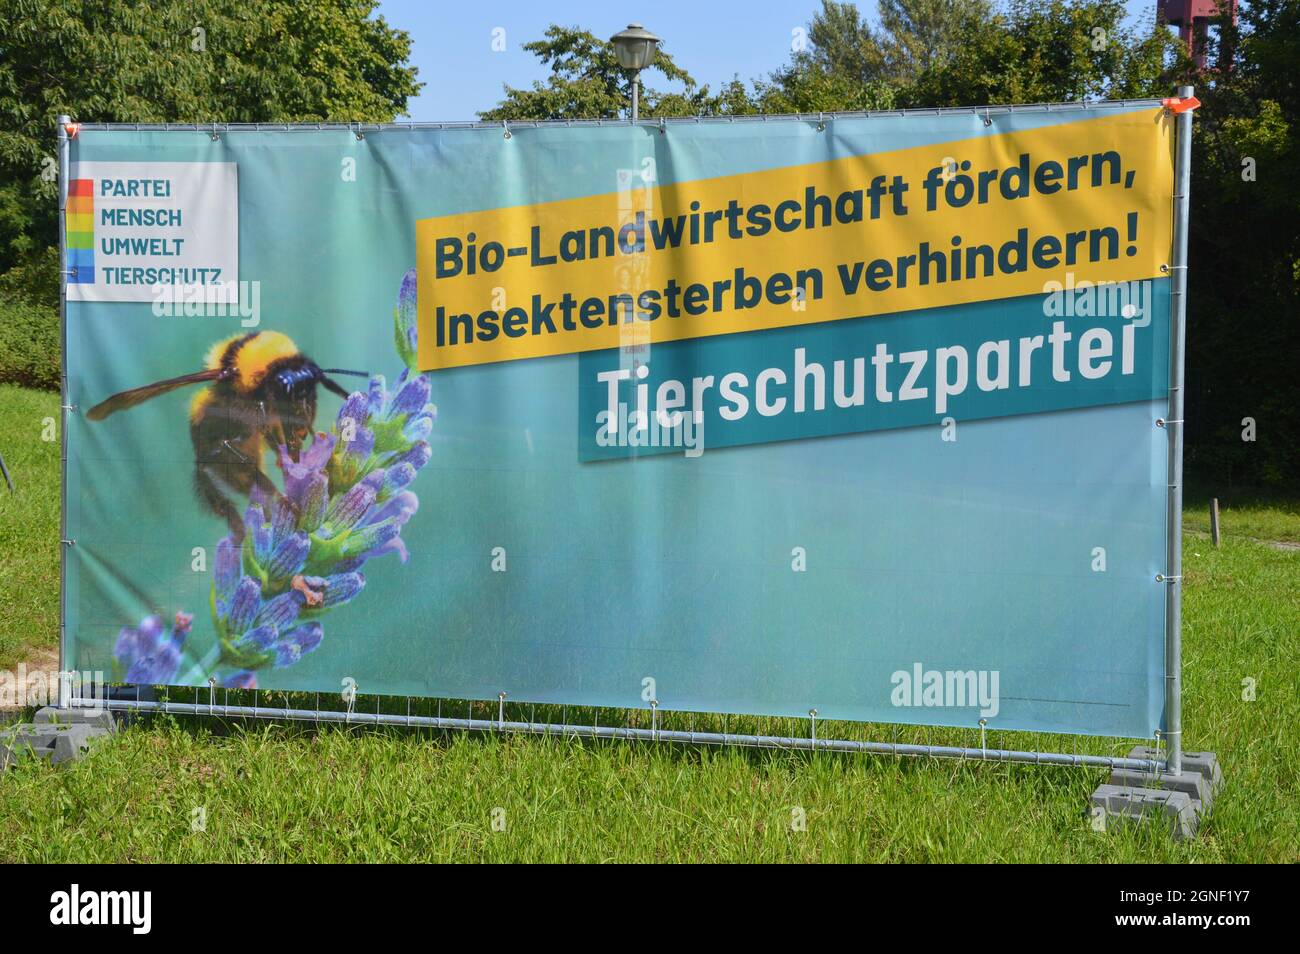 Campaign banner of The Human Environtment Animal Protection party at Prellerweg in Schoeneberg, Berlin, Germany - September 8, 2021. Stock Photo